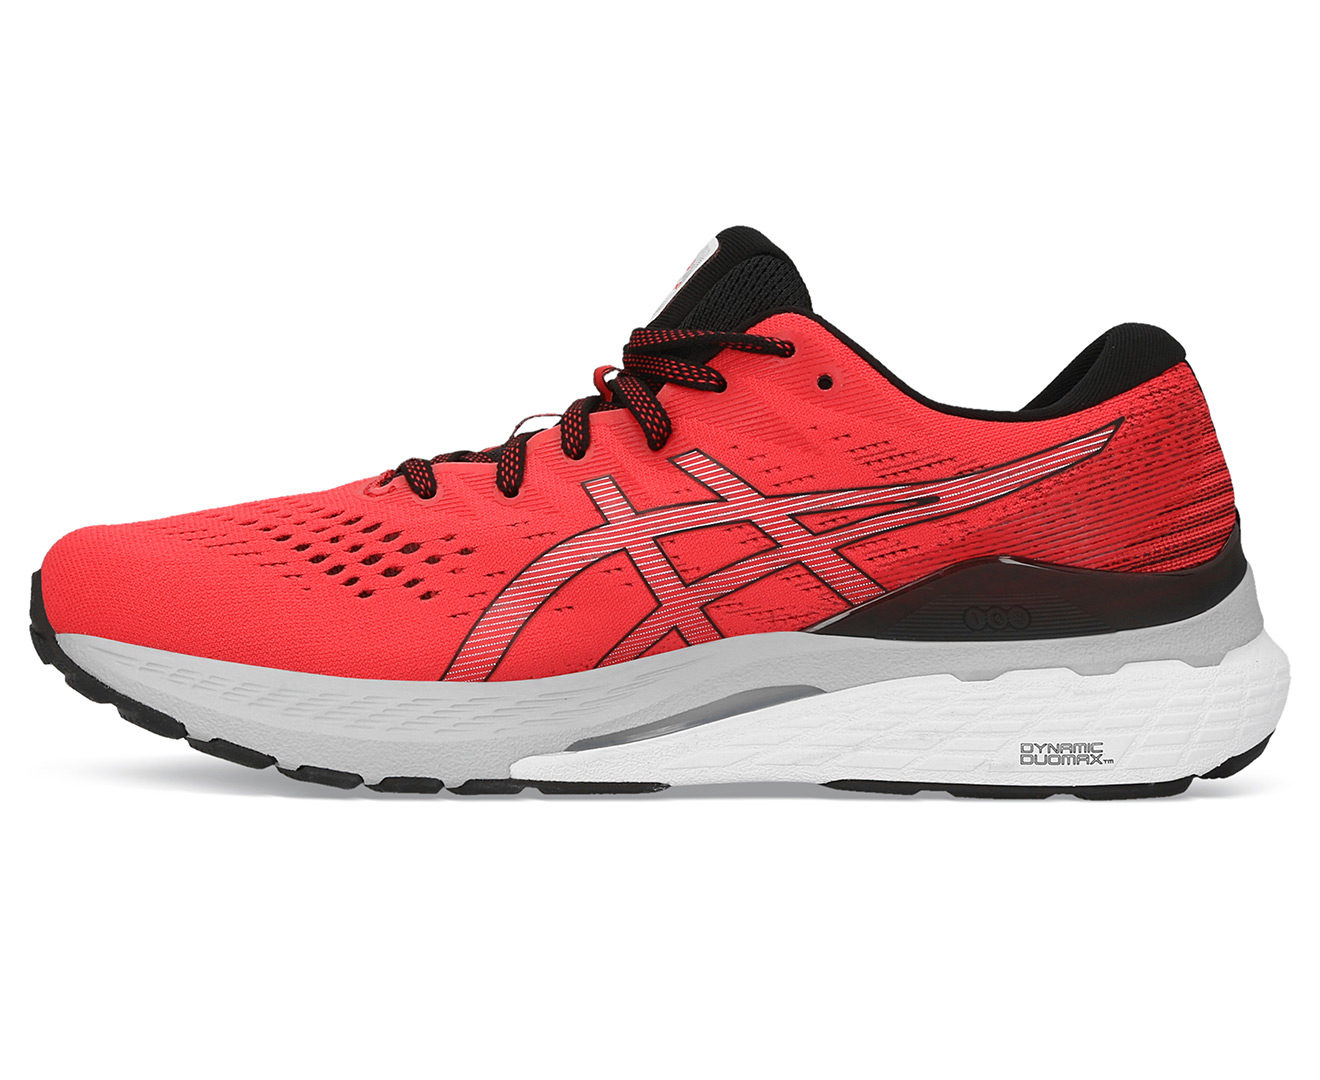 ASICS Men's GEL-Kayano 28 Running Shoes - Black/Electric Red | Catch.co.nz